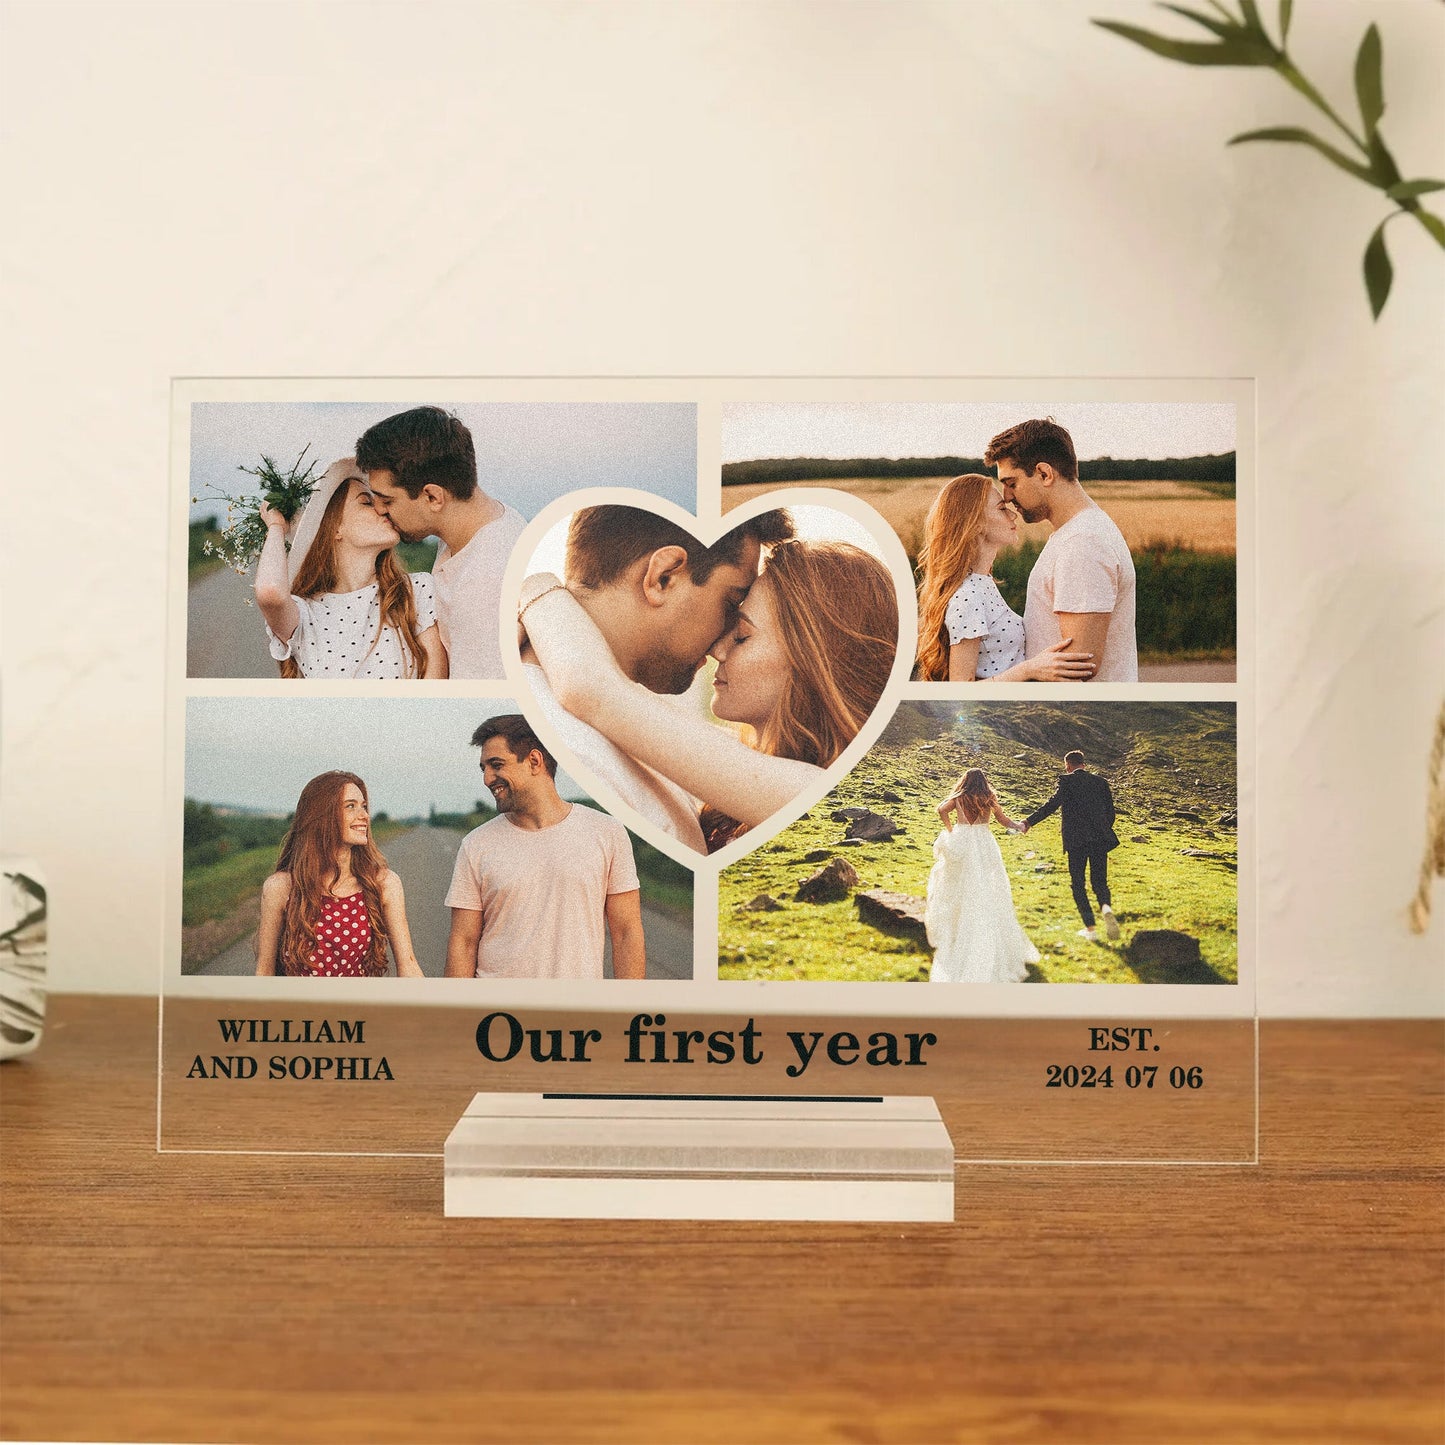 Our First Year - Personalized Acrylic Photo Plaque